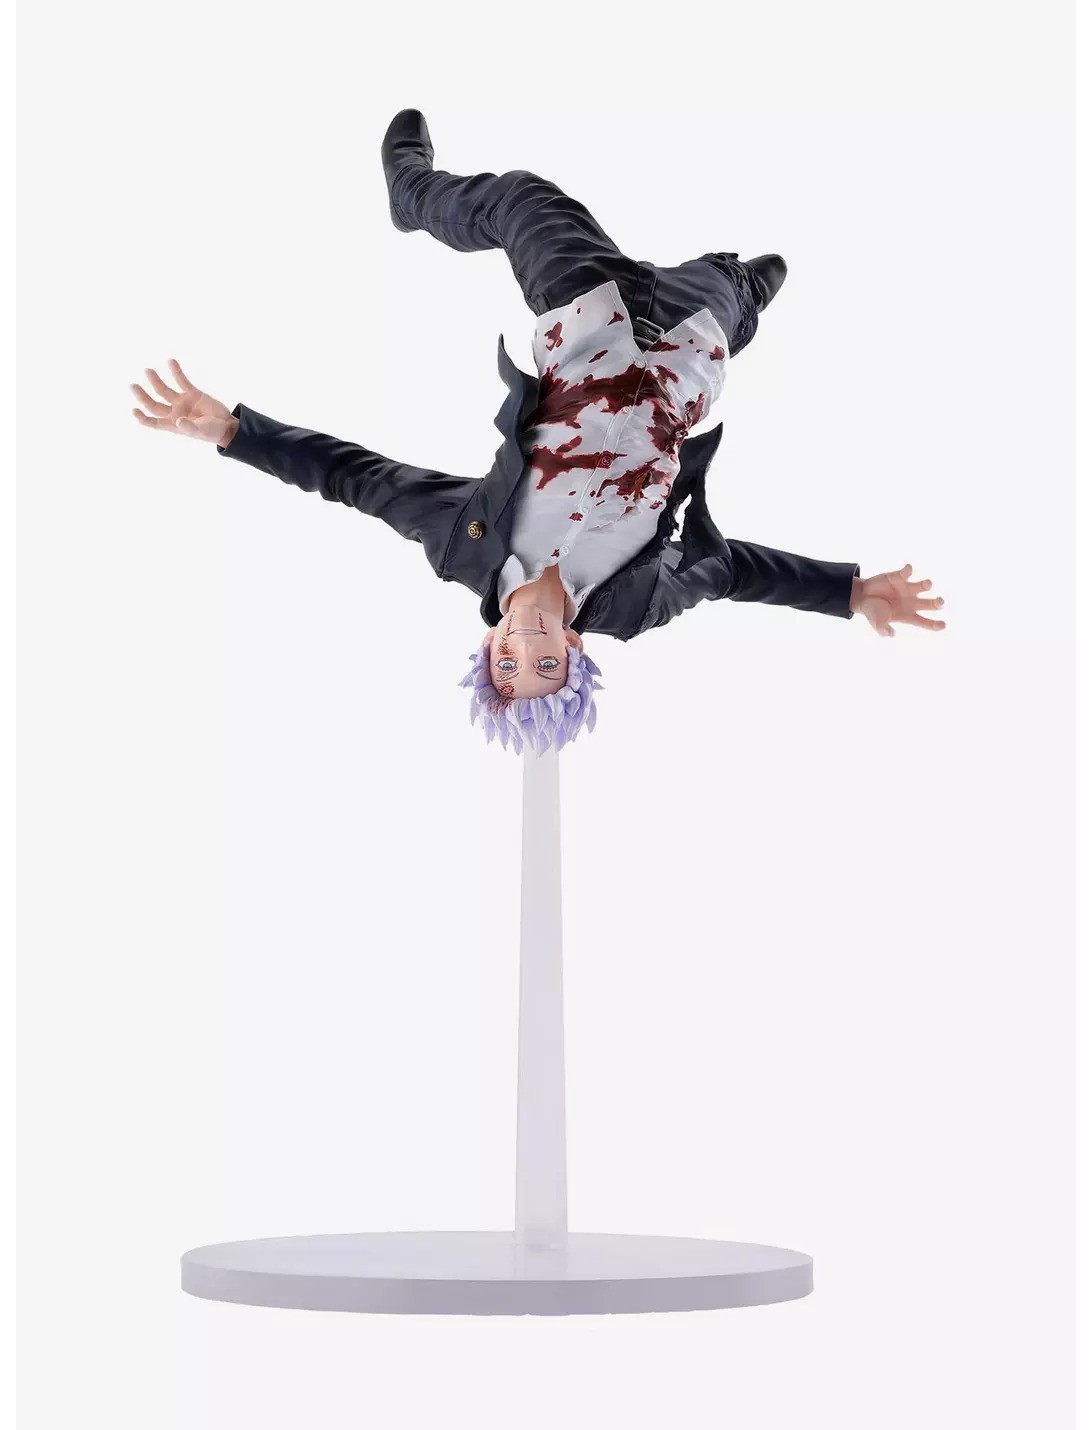 Gojo statue. This image is part of an article about the best anime merch for 2024: our top 10 picks.